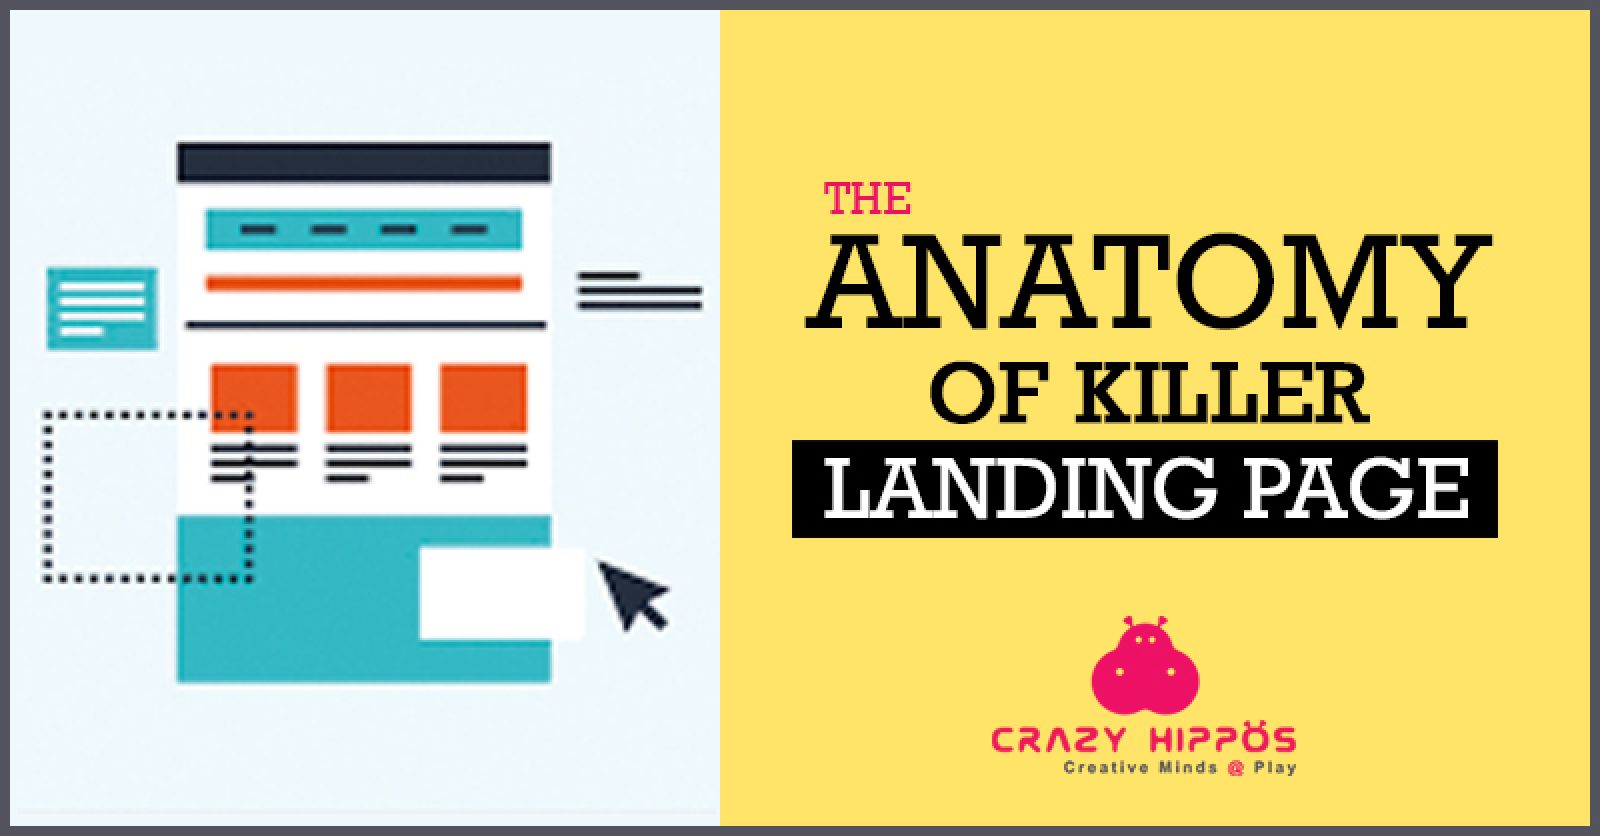 THE ANATOMY OF A KILLER LANDING PAGE